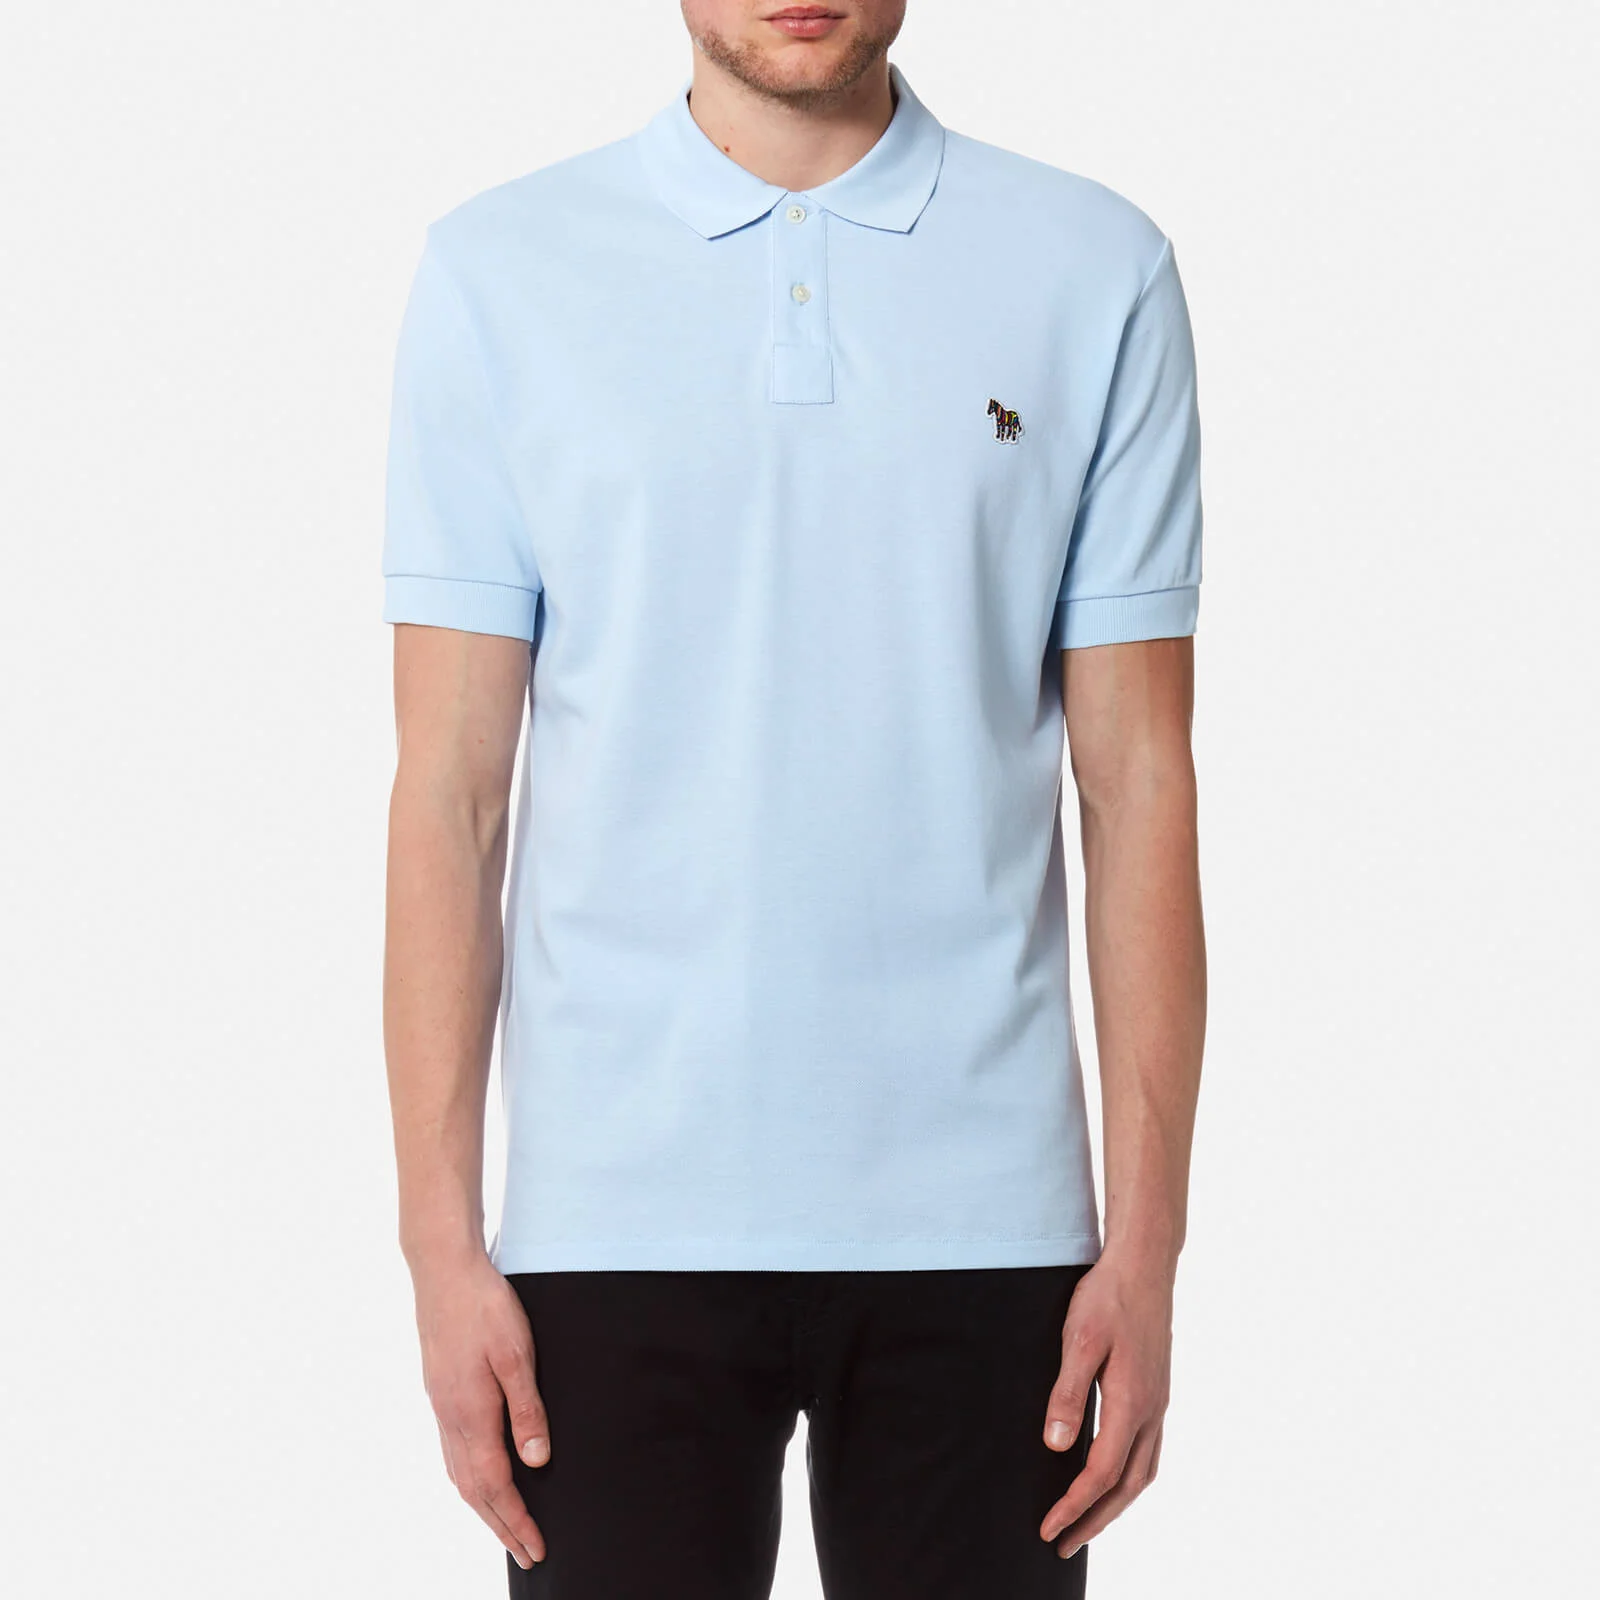 PS by Paul Smith Men's Regular Fit Short Sleeve Polo Shirt - Sky Image 1